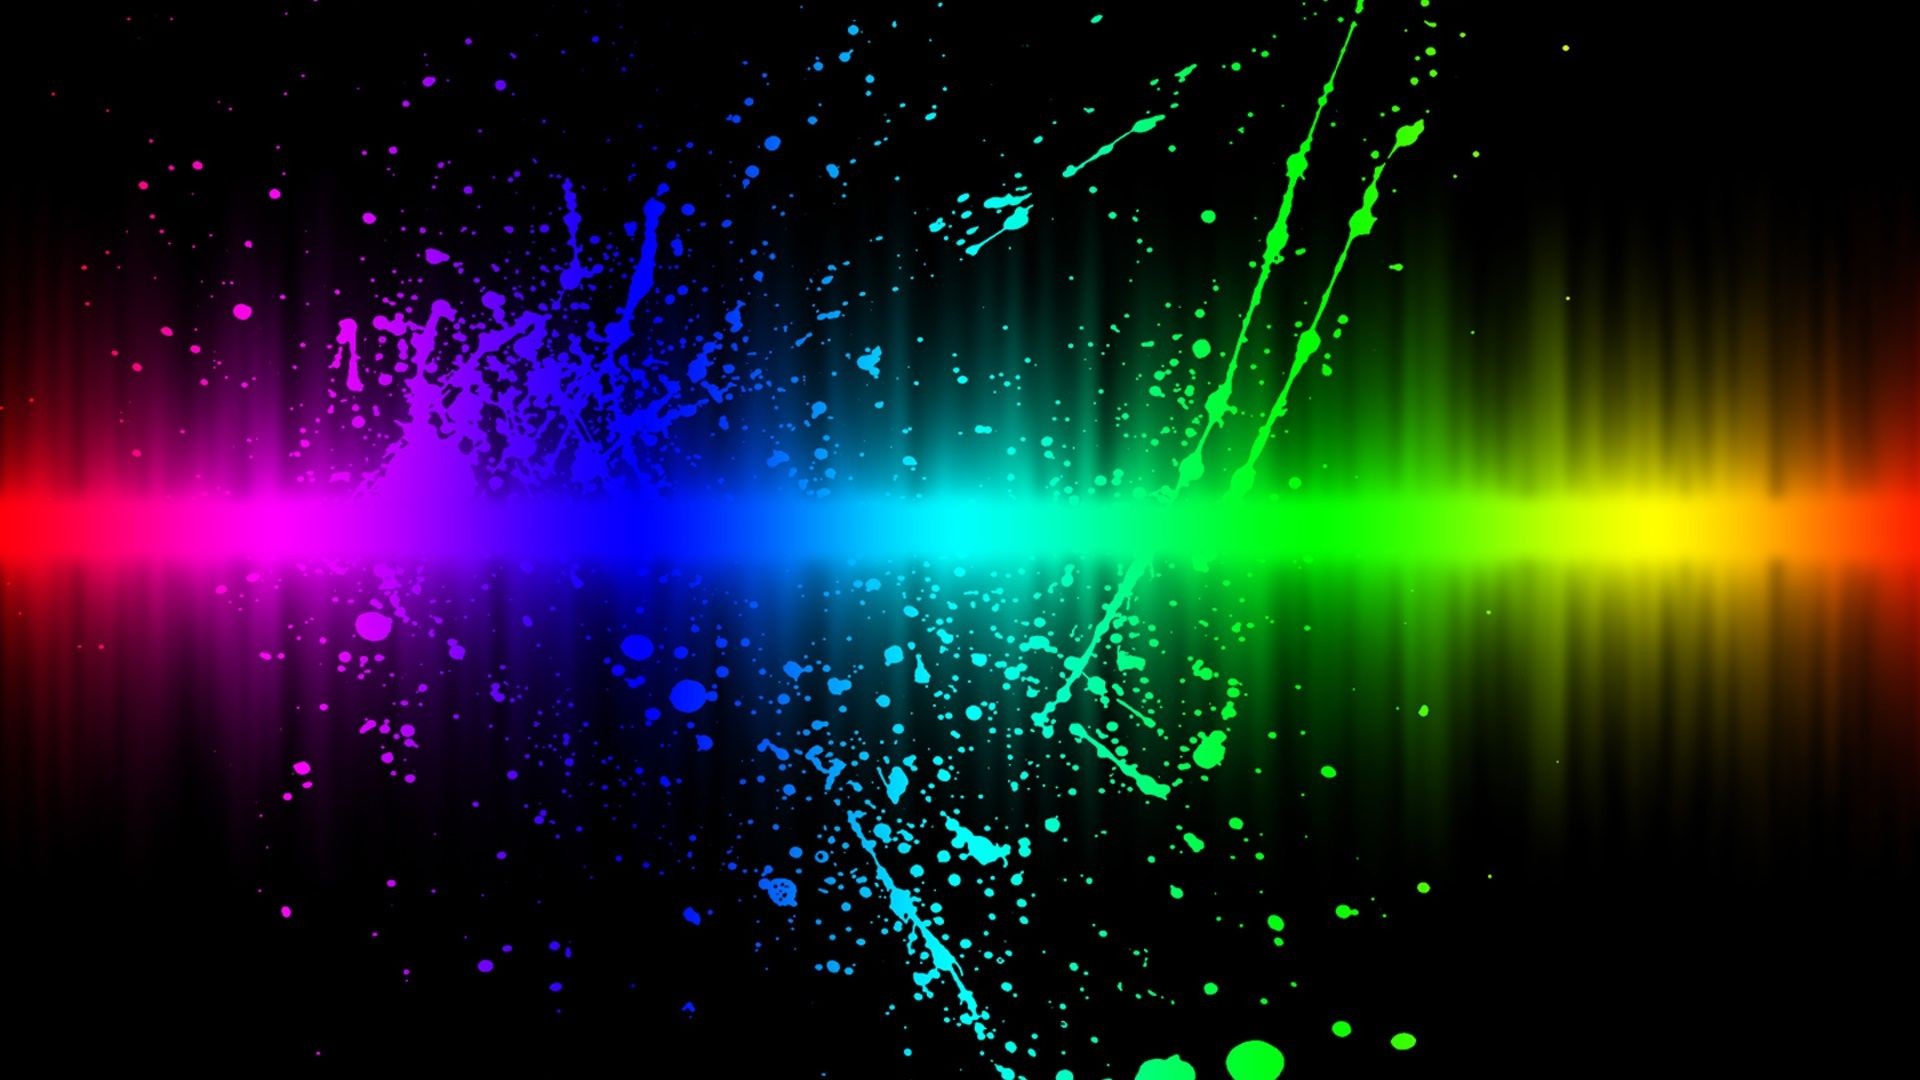 HD Wallpaper Rainbow Colors with image resolution 1920x1080 pixel. You can make this wallpaper for your Desktop Computer Backgrounds, Mac Wallpapers, Android Lock screen or iPhone Screensavers